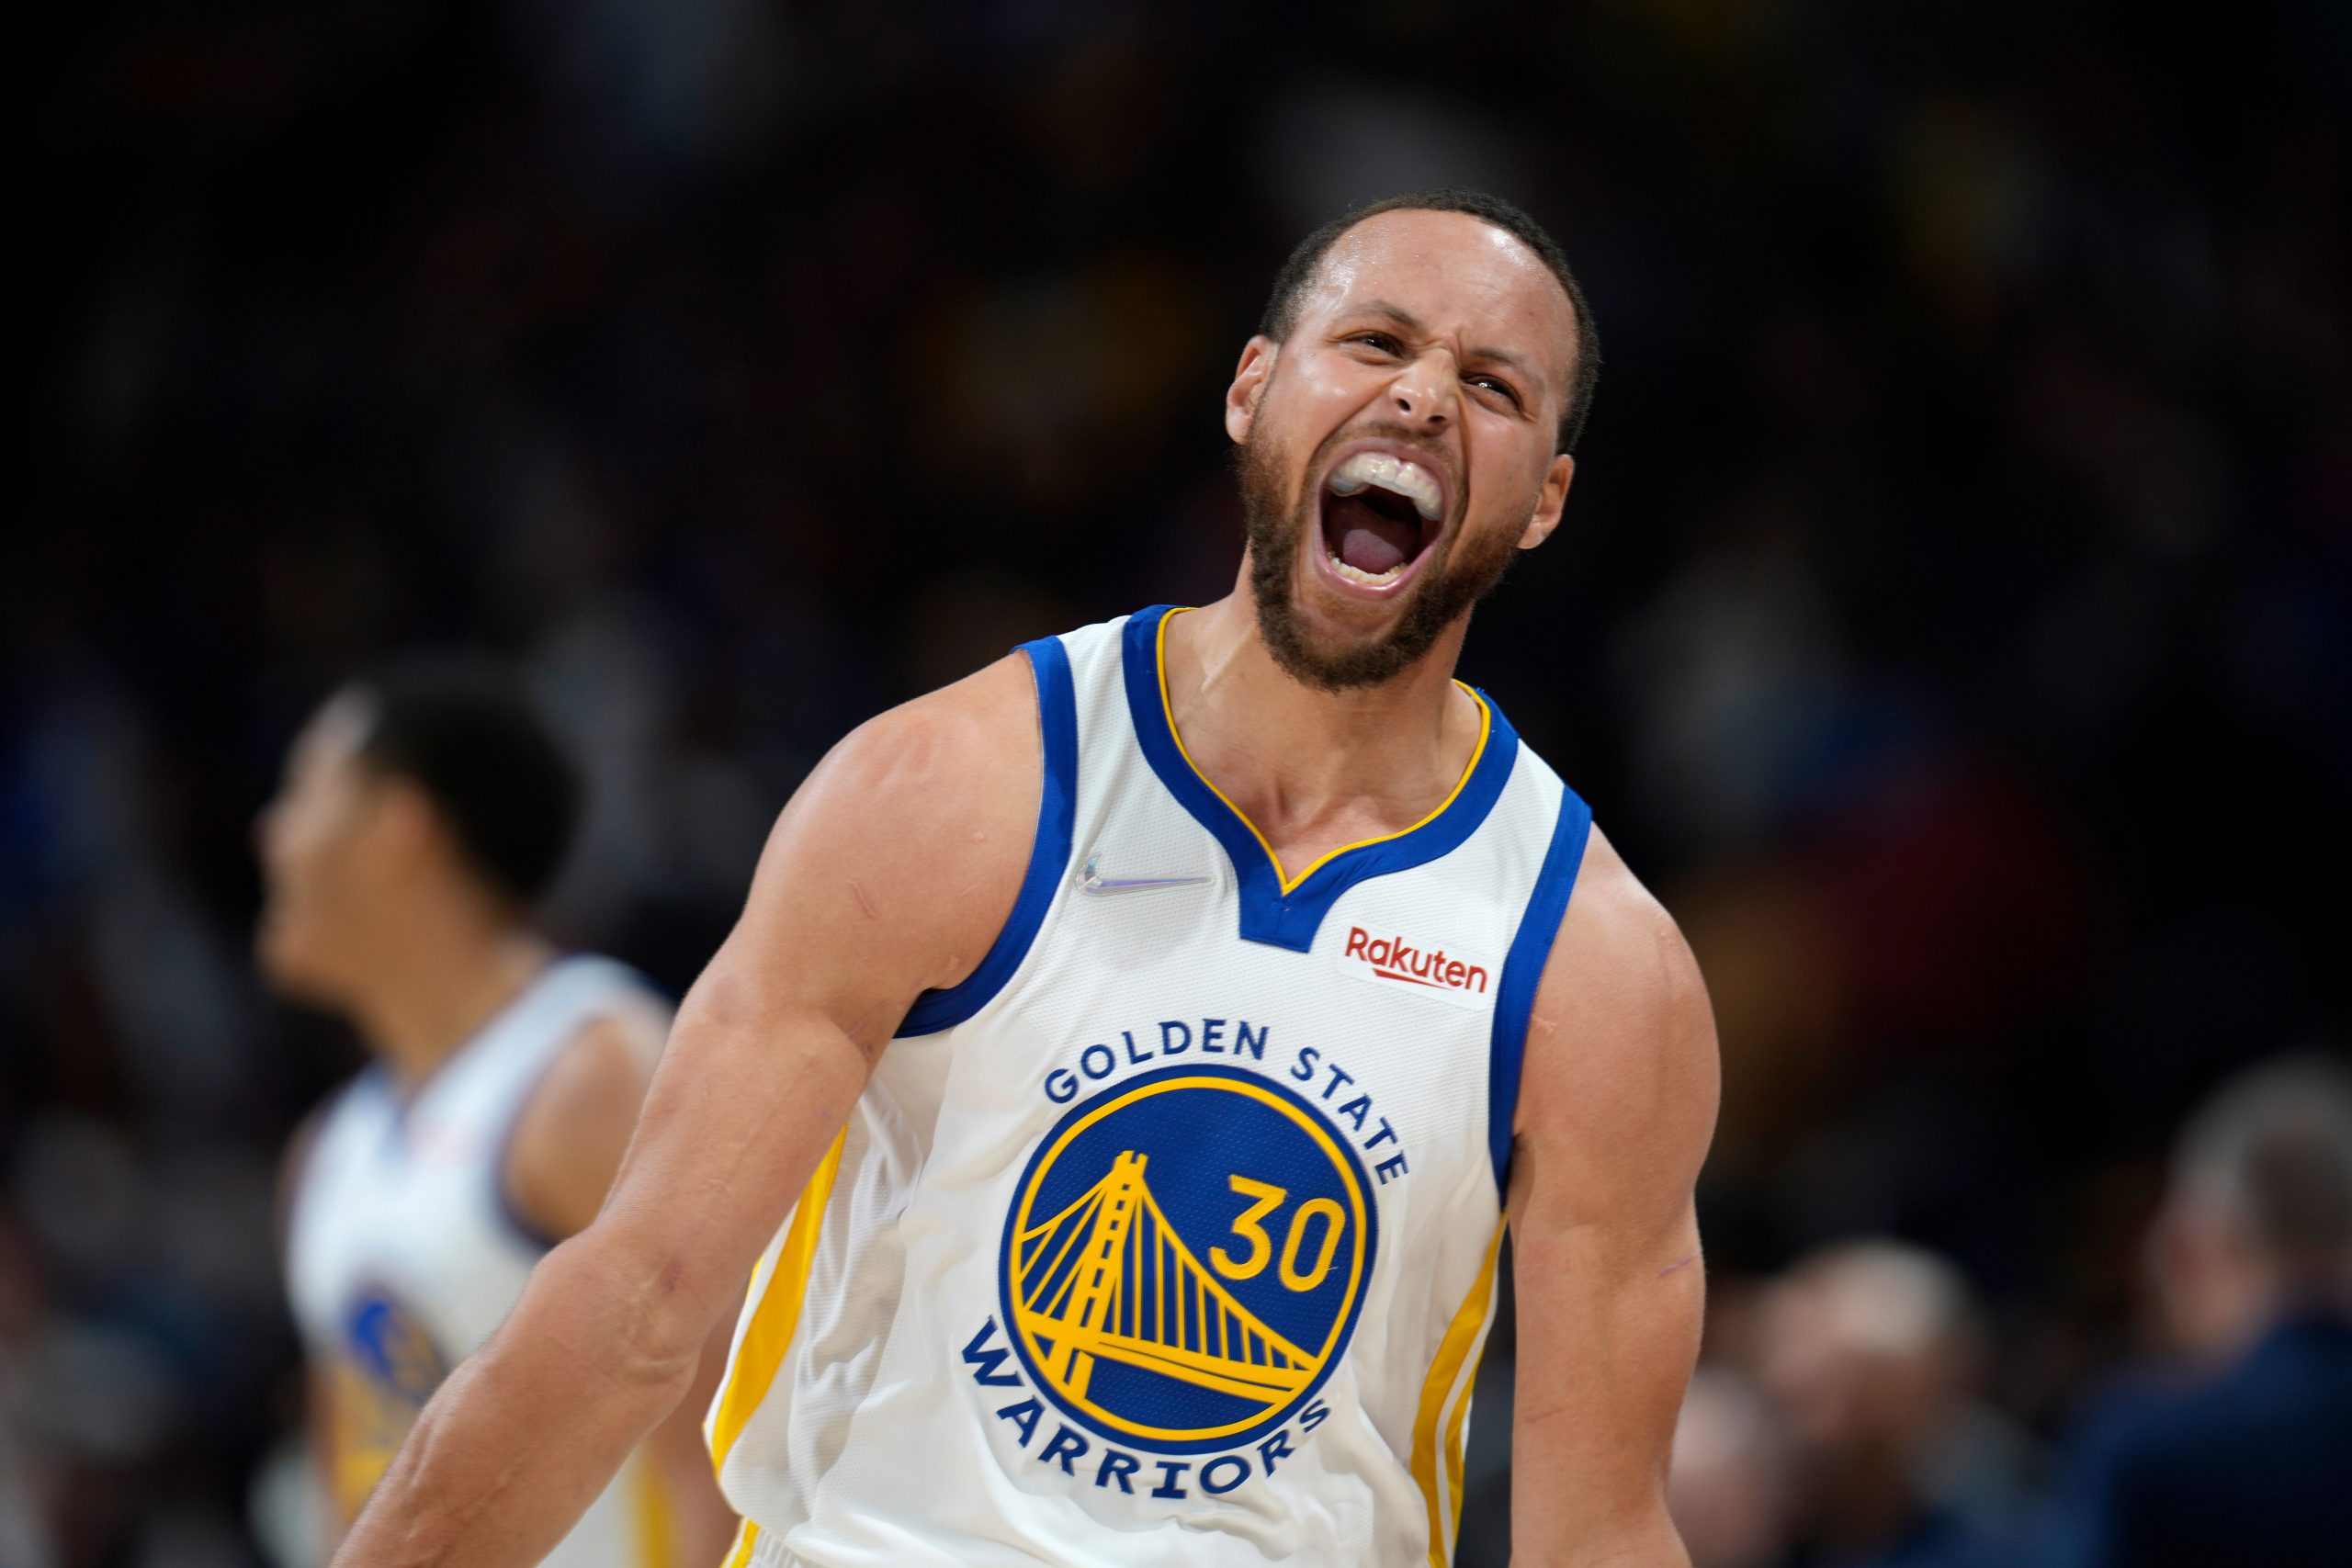 NBA: Curry scores 34 points, Golden State Warriors beat Denver Nuggets 113-102